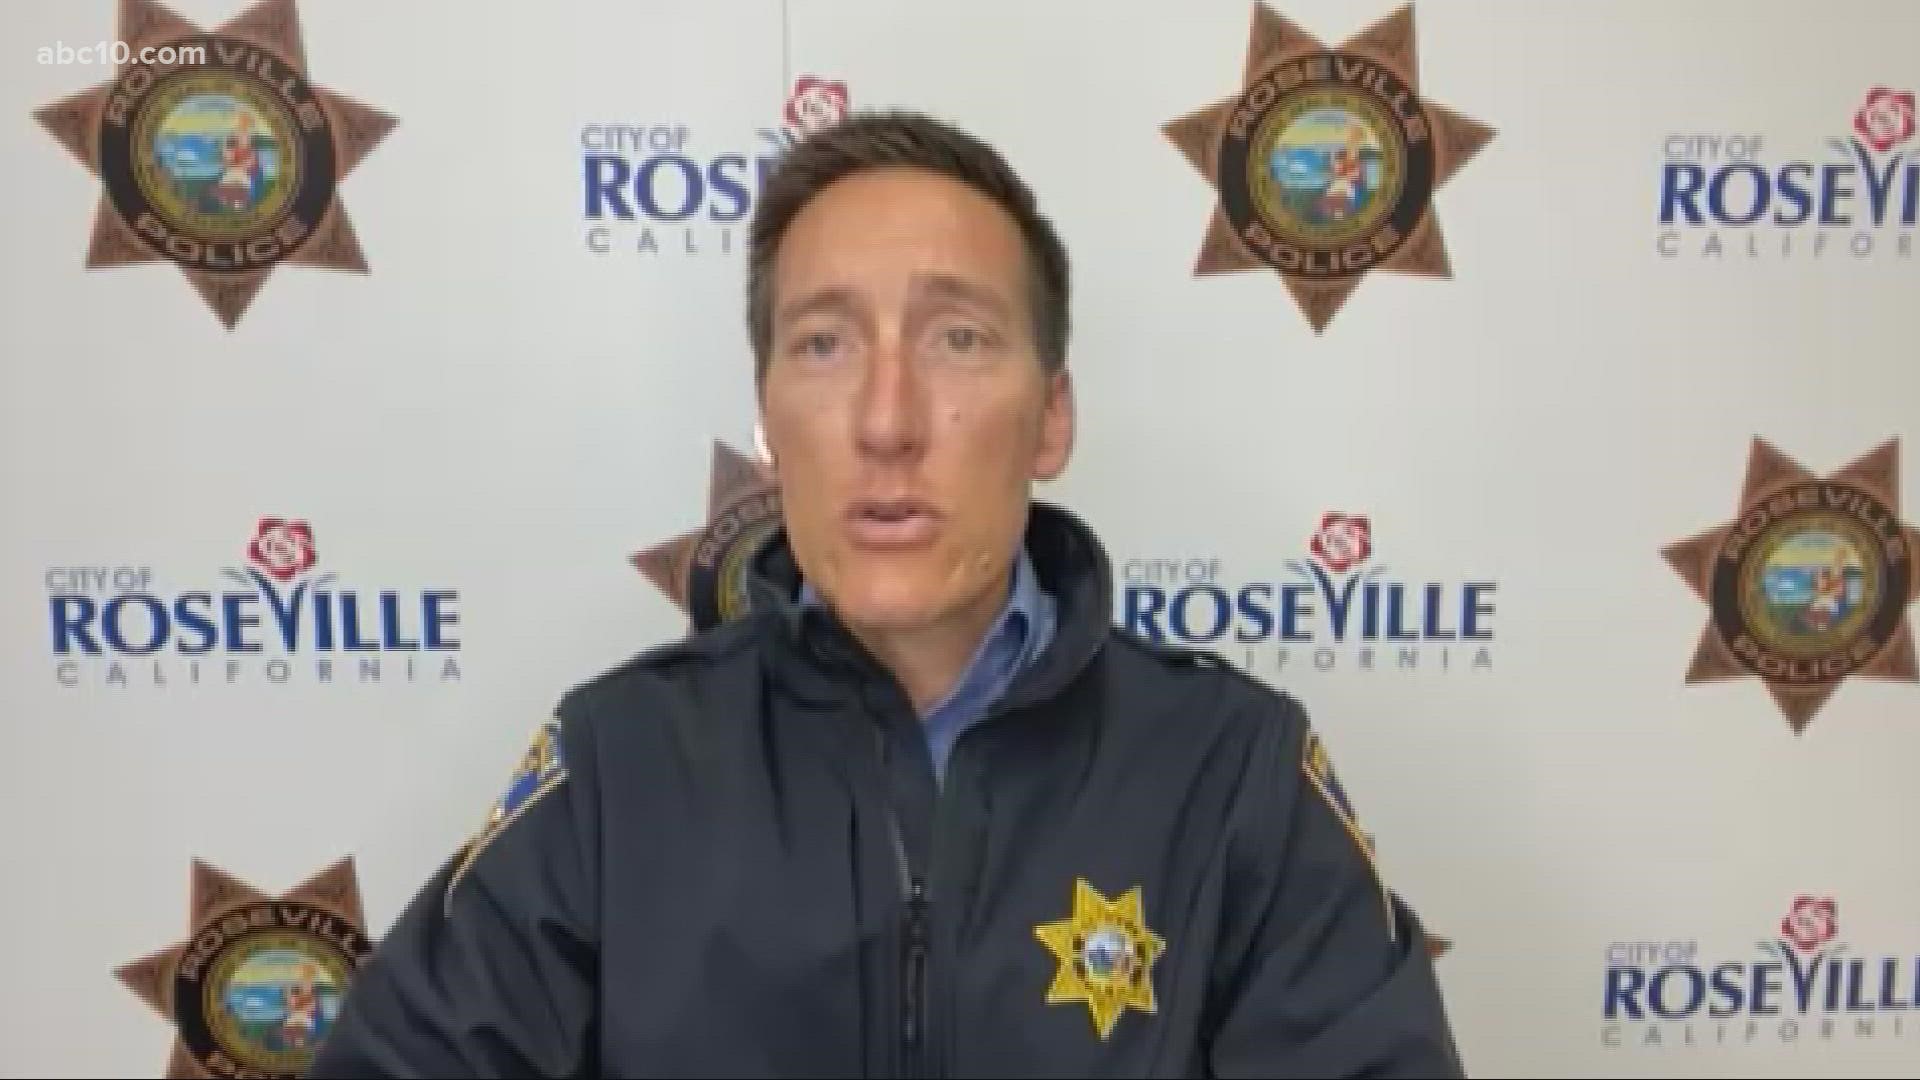 The overall crime rate in Roseville decreased by 1% in 2021, compared to 2020 with 29 fewer crimes in 2021.